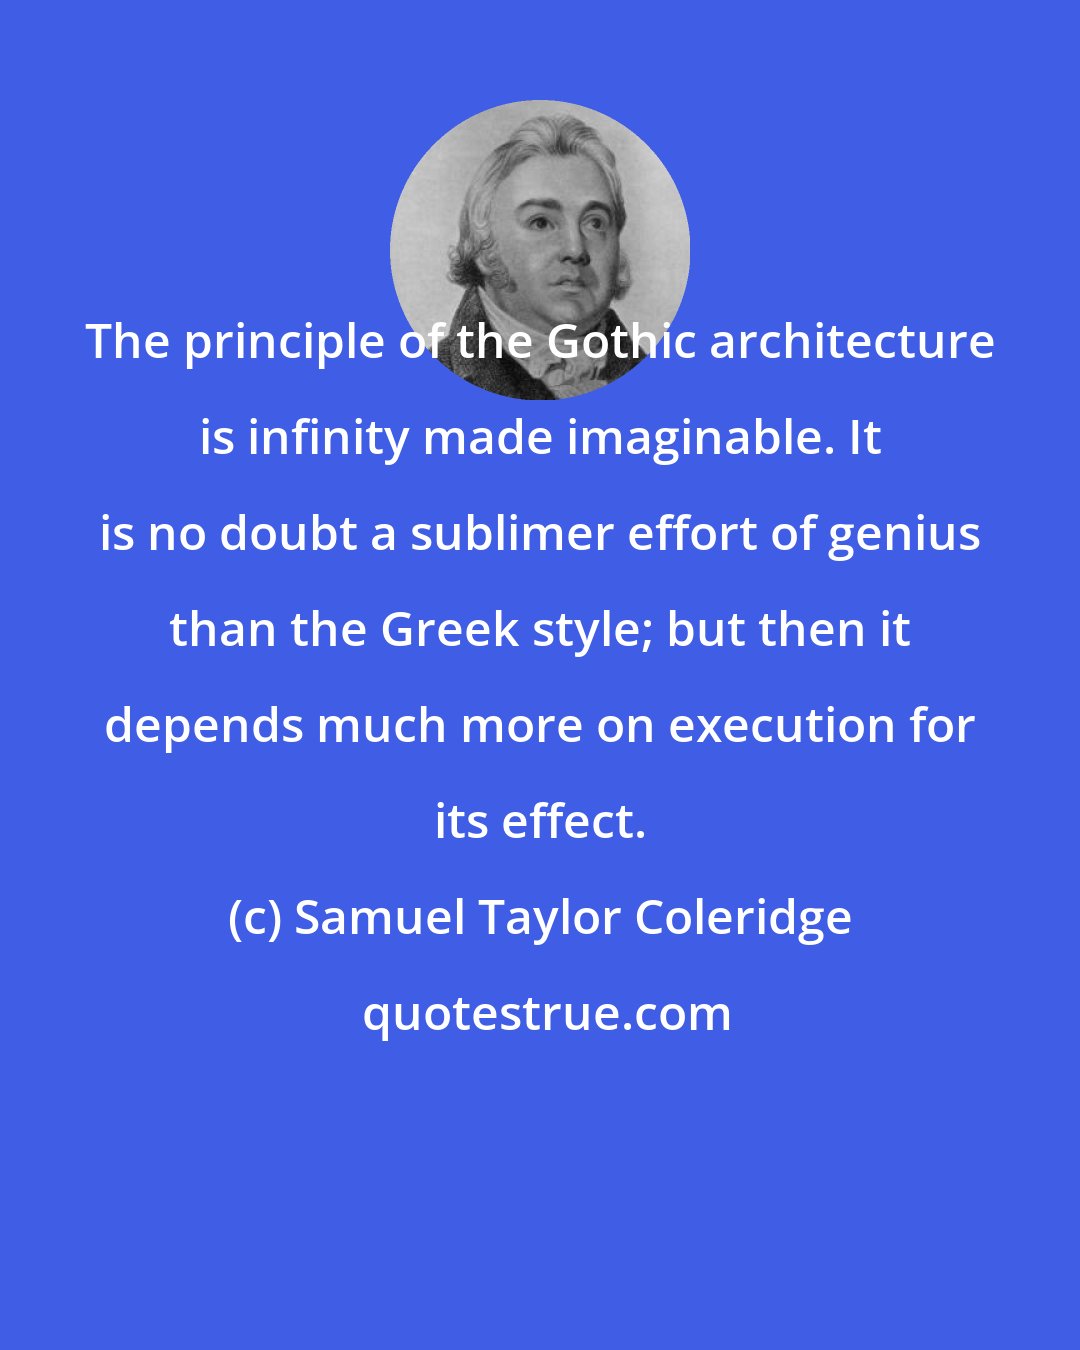 Samuel Taylor Coleridge: The principle of the Gothic architecture is infinity made imaginable. It is no doubt a sublimer effort of genius than the Greek style; but then it depends much more on execution for its effect.